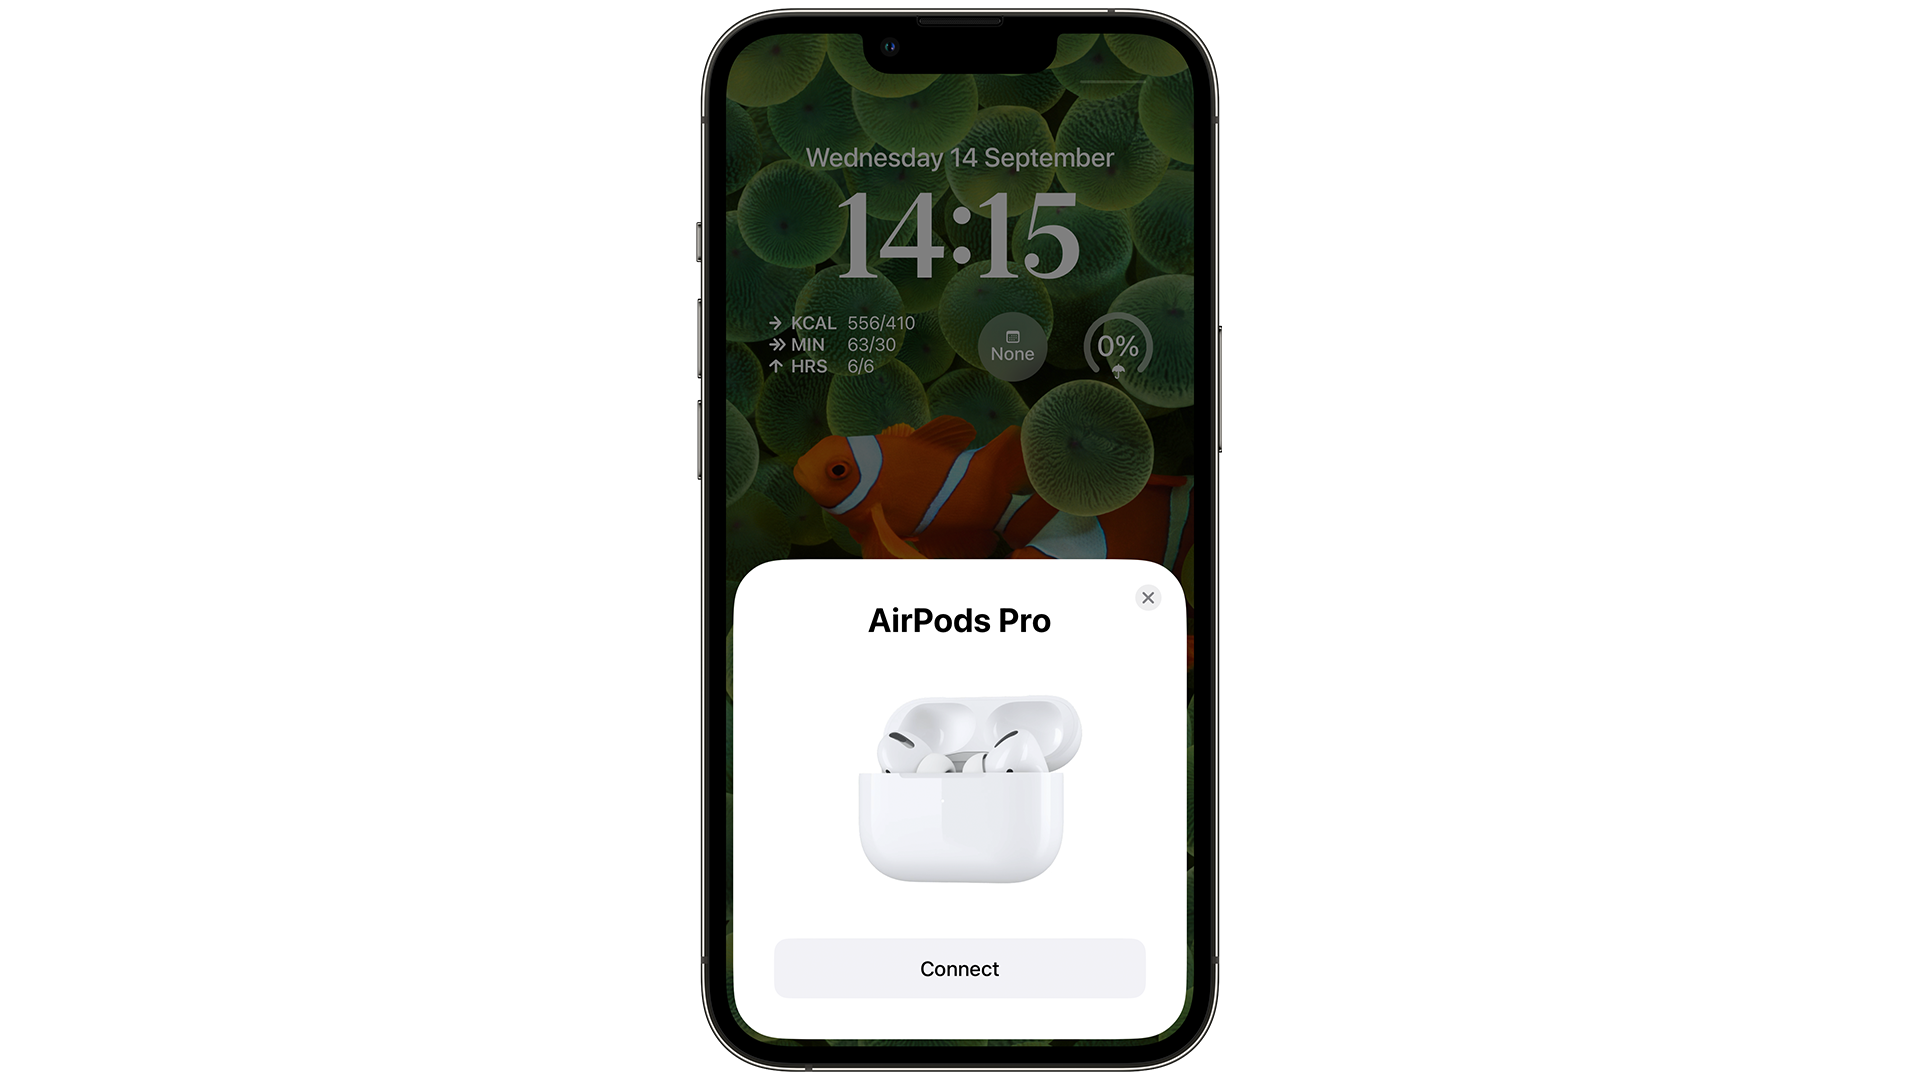 AirPods Pro connection in iOS 16